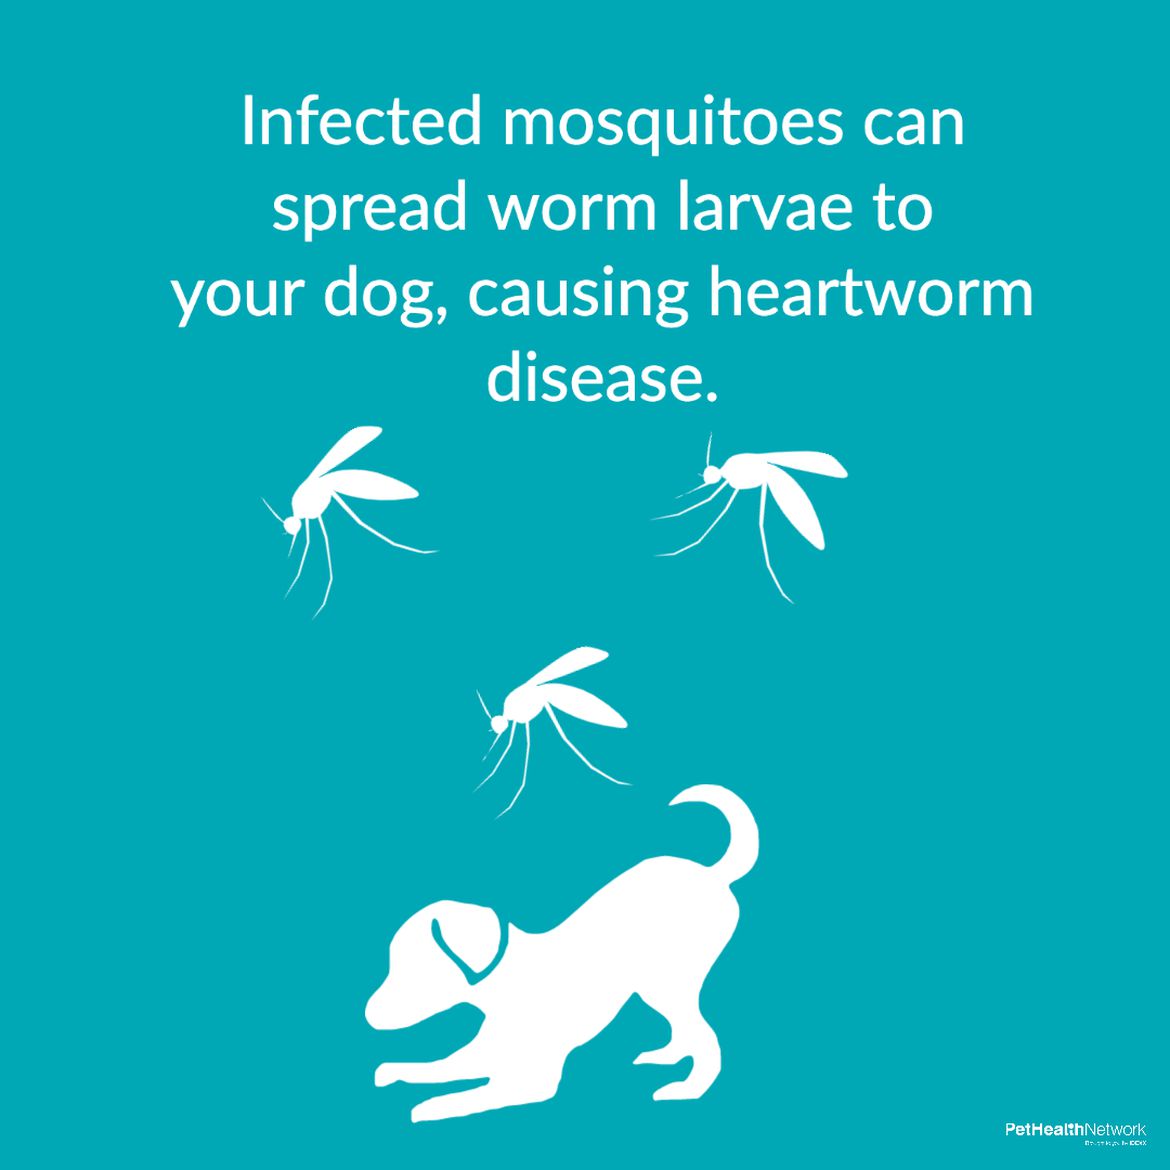 Social media post to raise awareness on heartworm disease caused by mosquitoes.